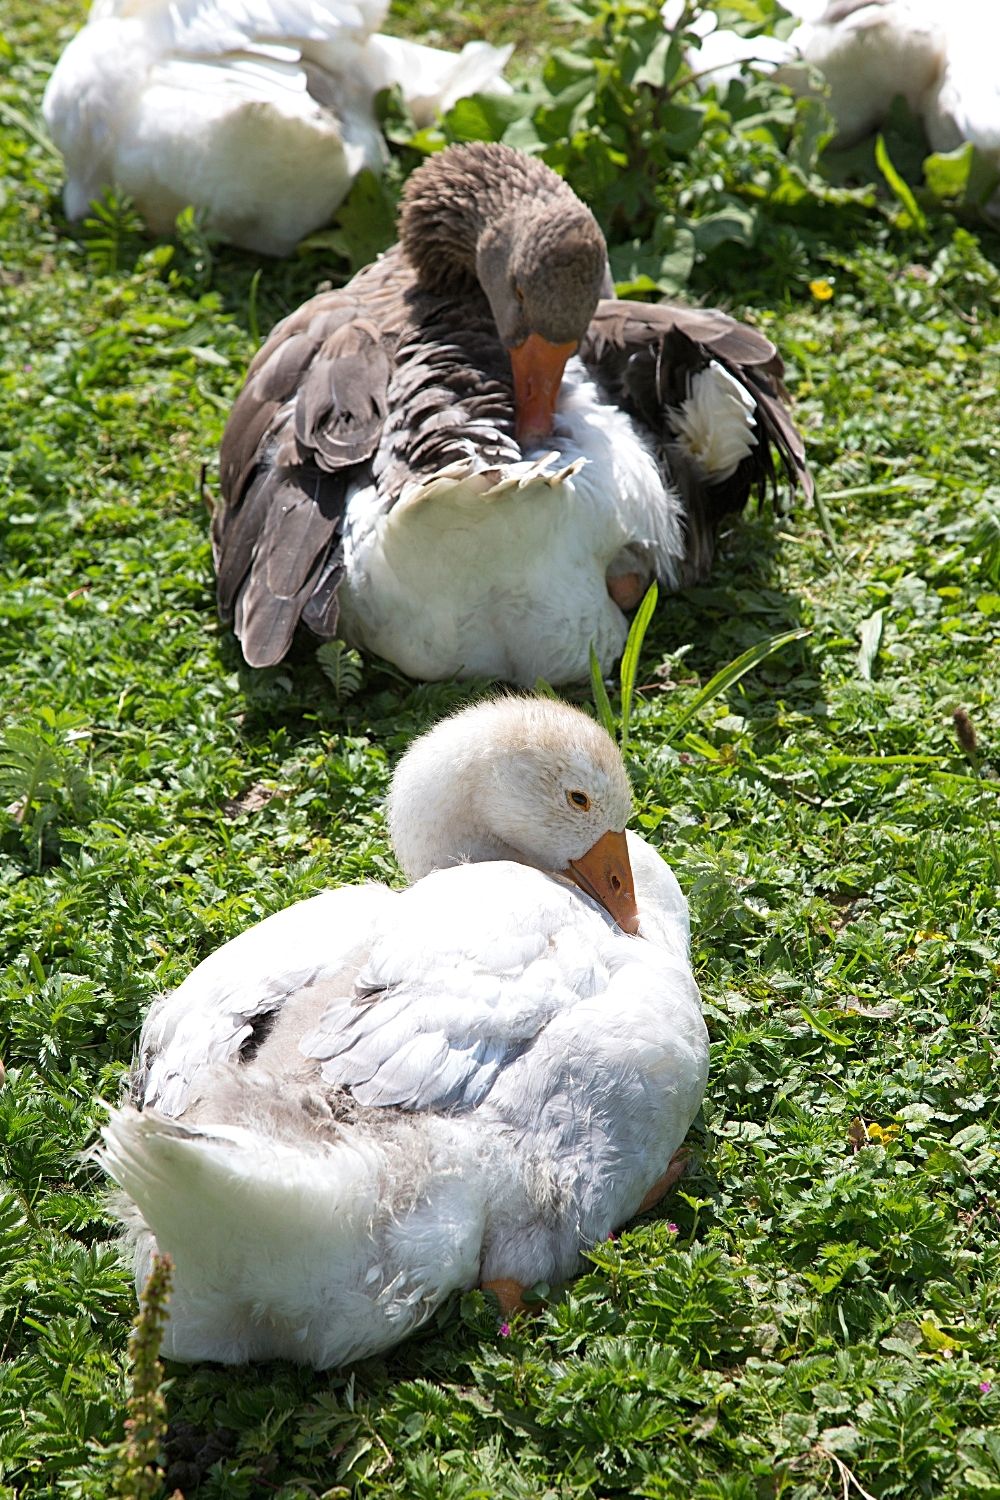 Geese tuck their head into their wings when they sleep